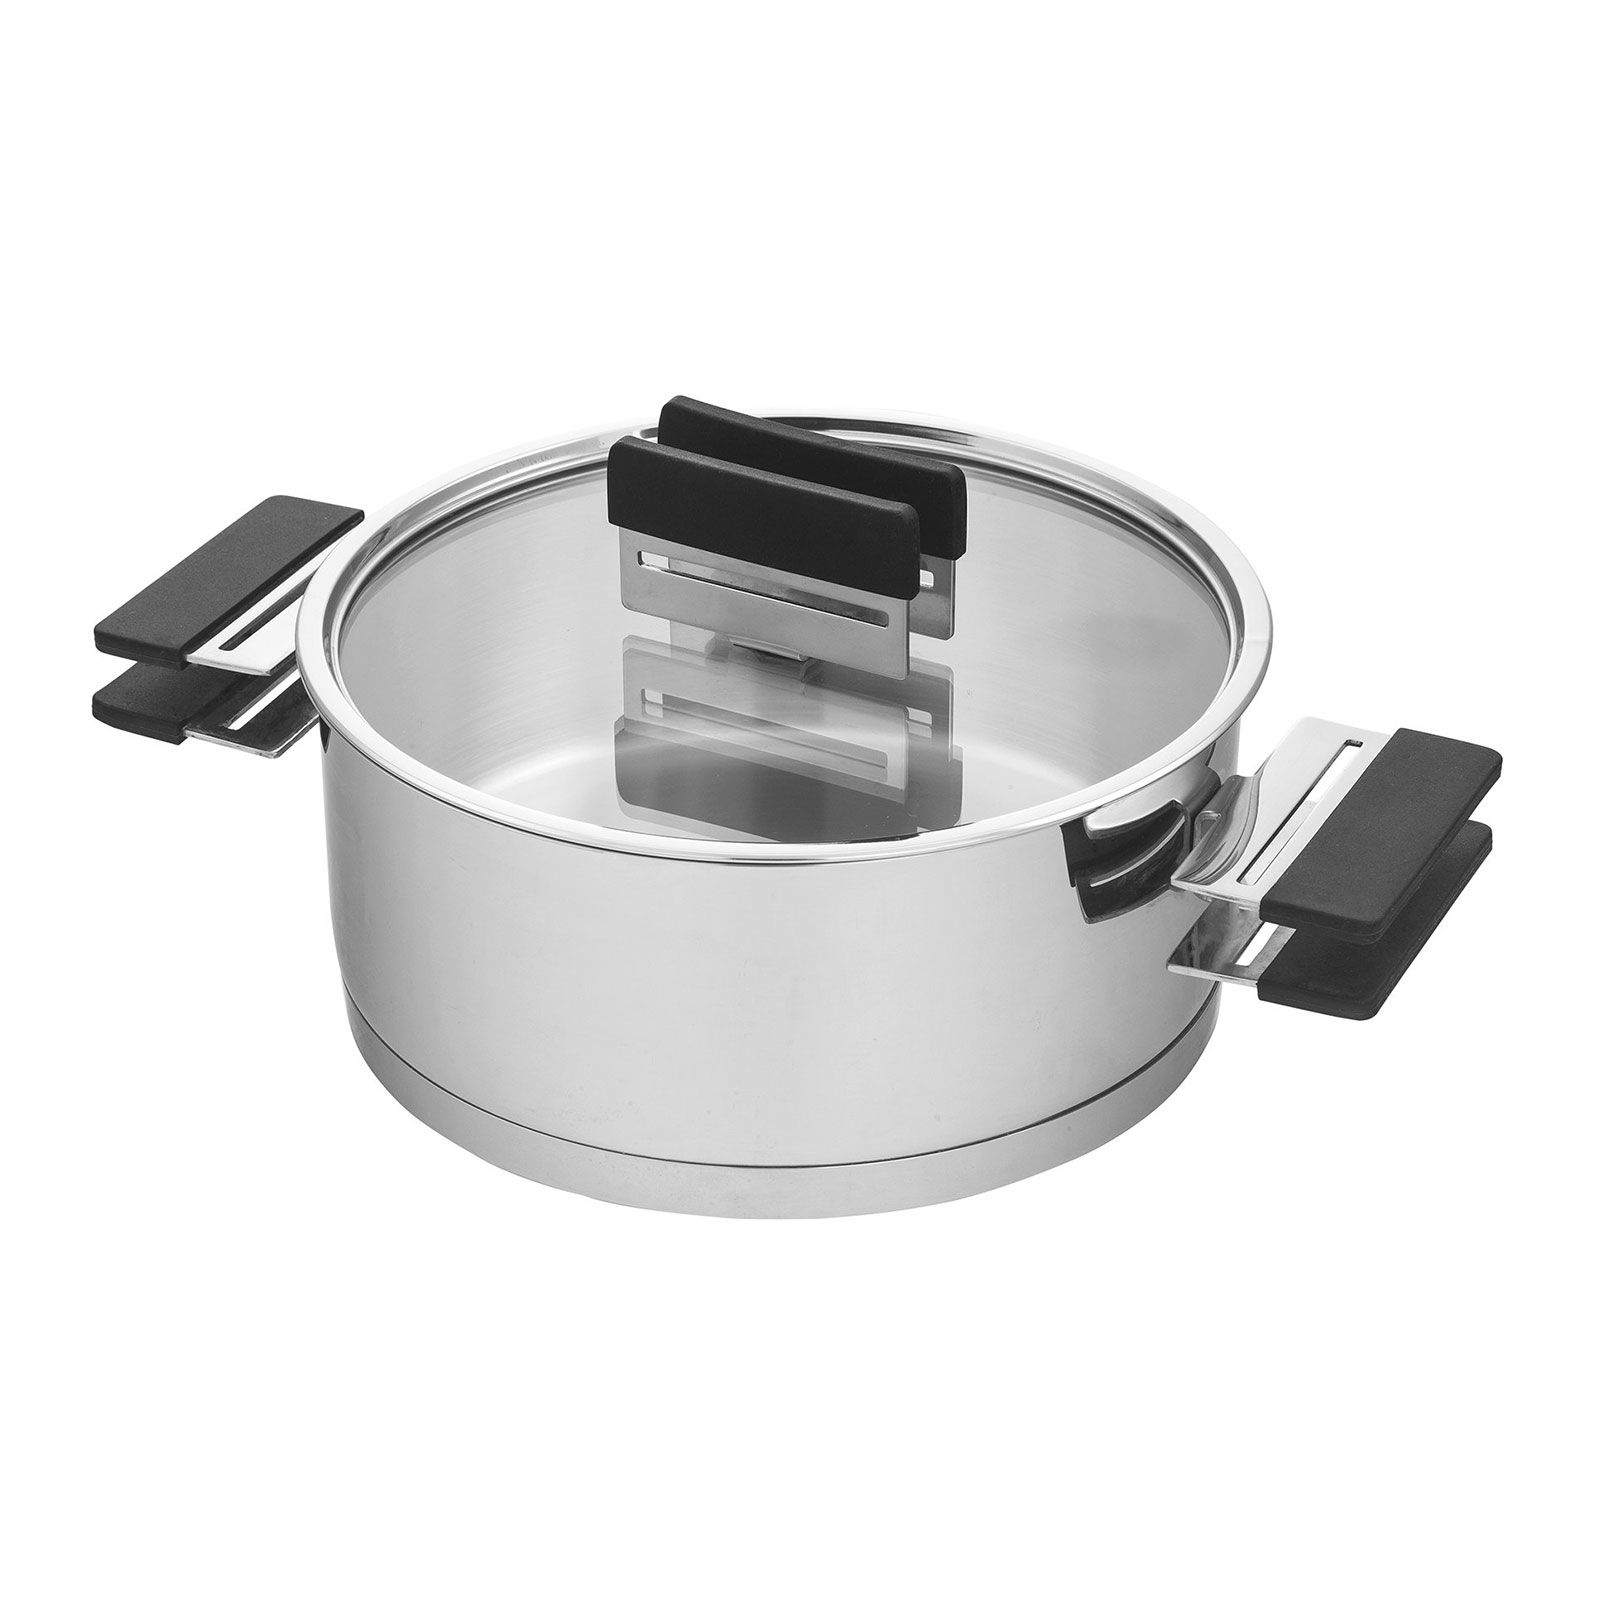 Walco Stainless WIR22 Induction Chafing Dish